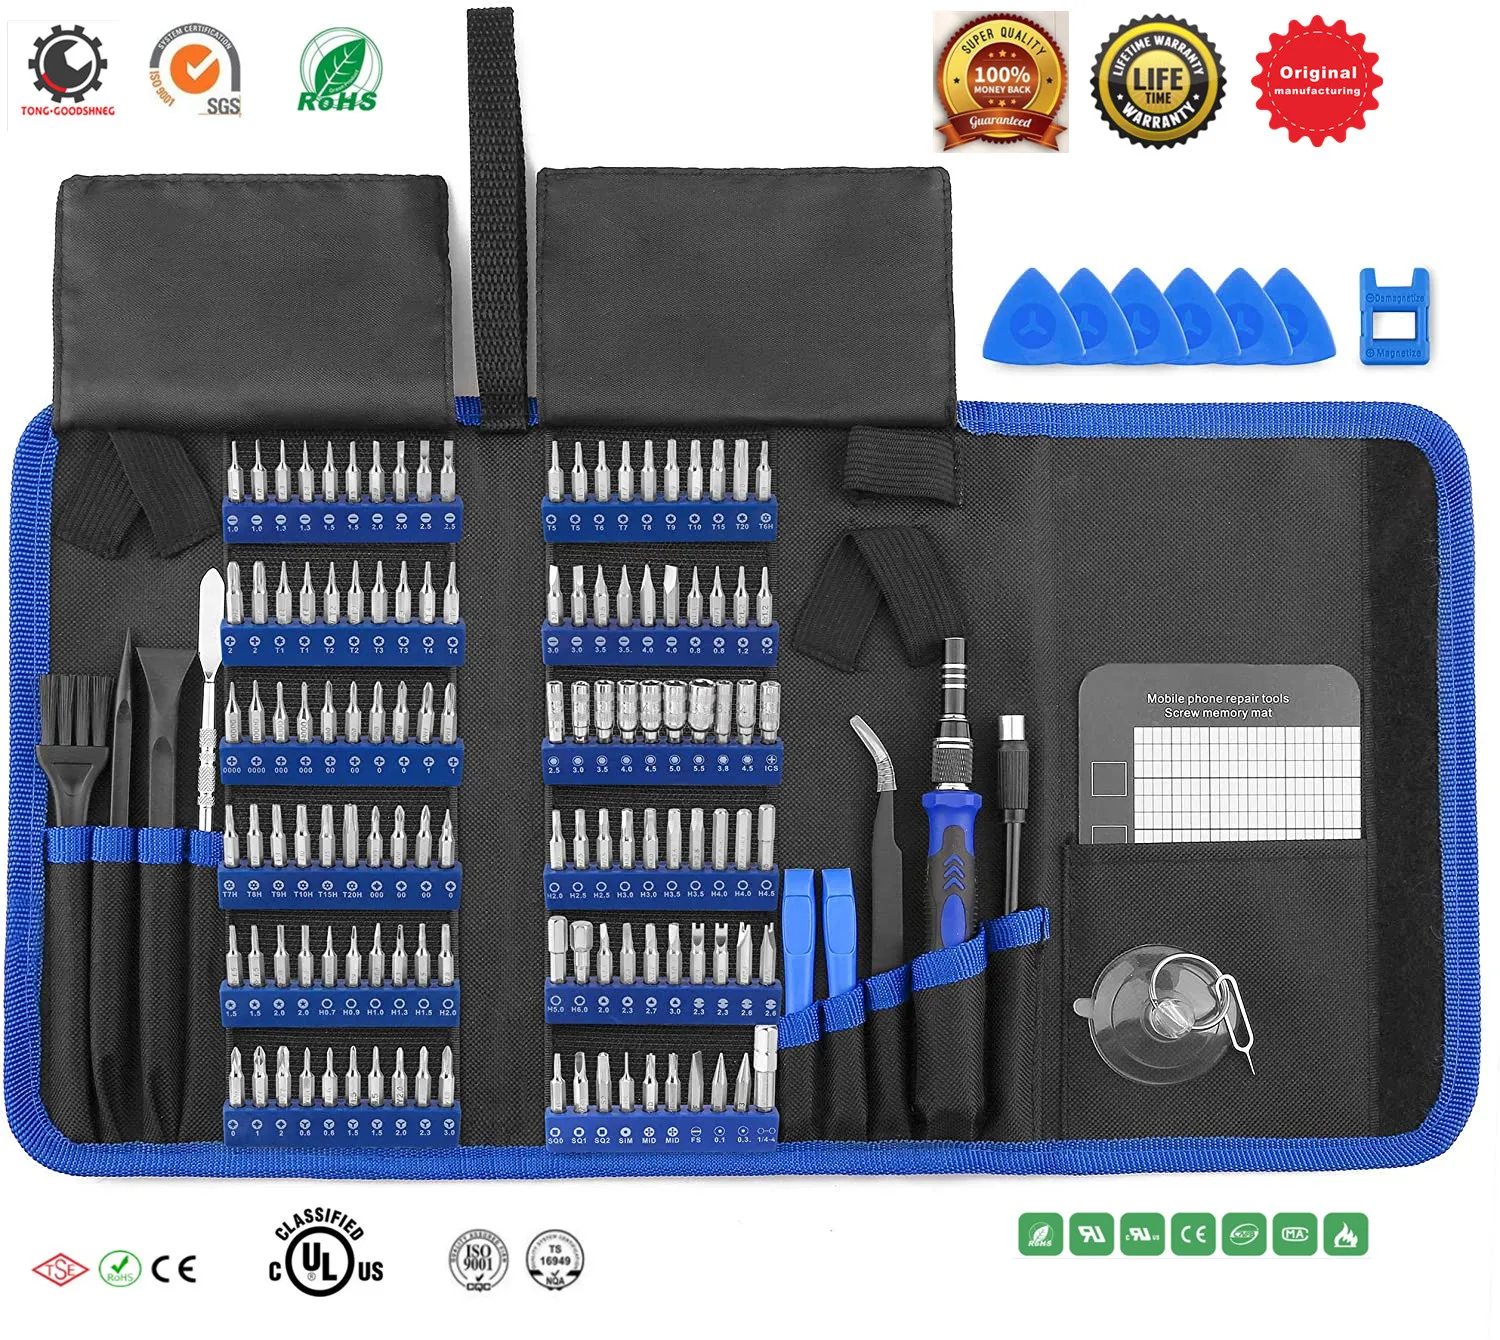 84 In 1 Repair Tools Kit W Magnetic Driver Professional Electronics Precision Sc 